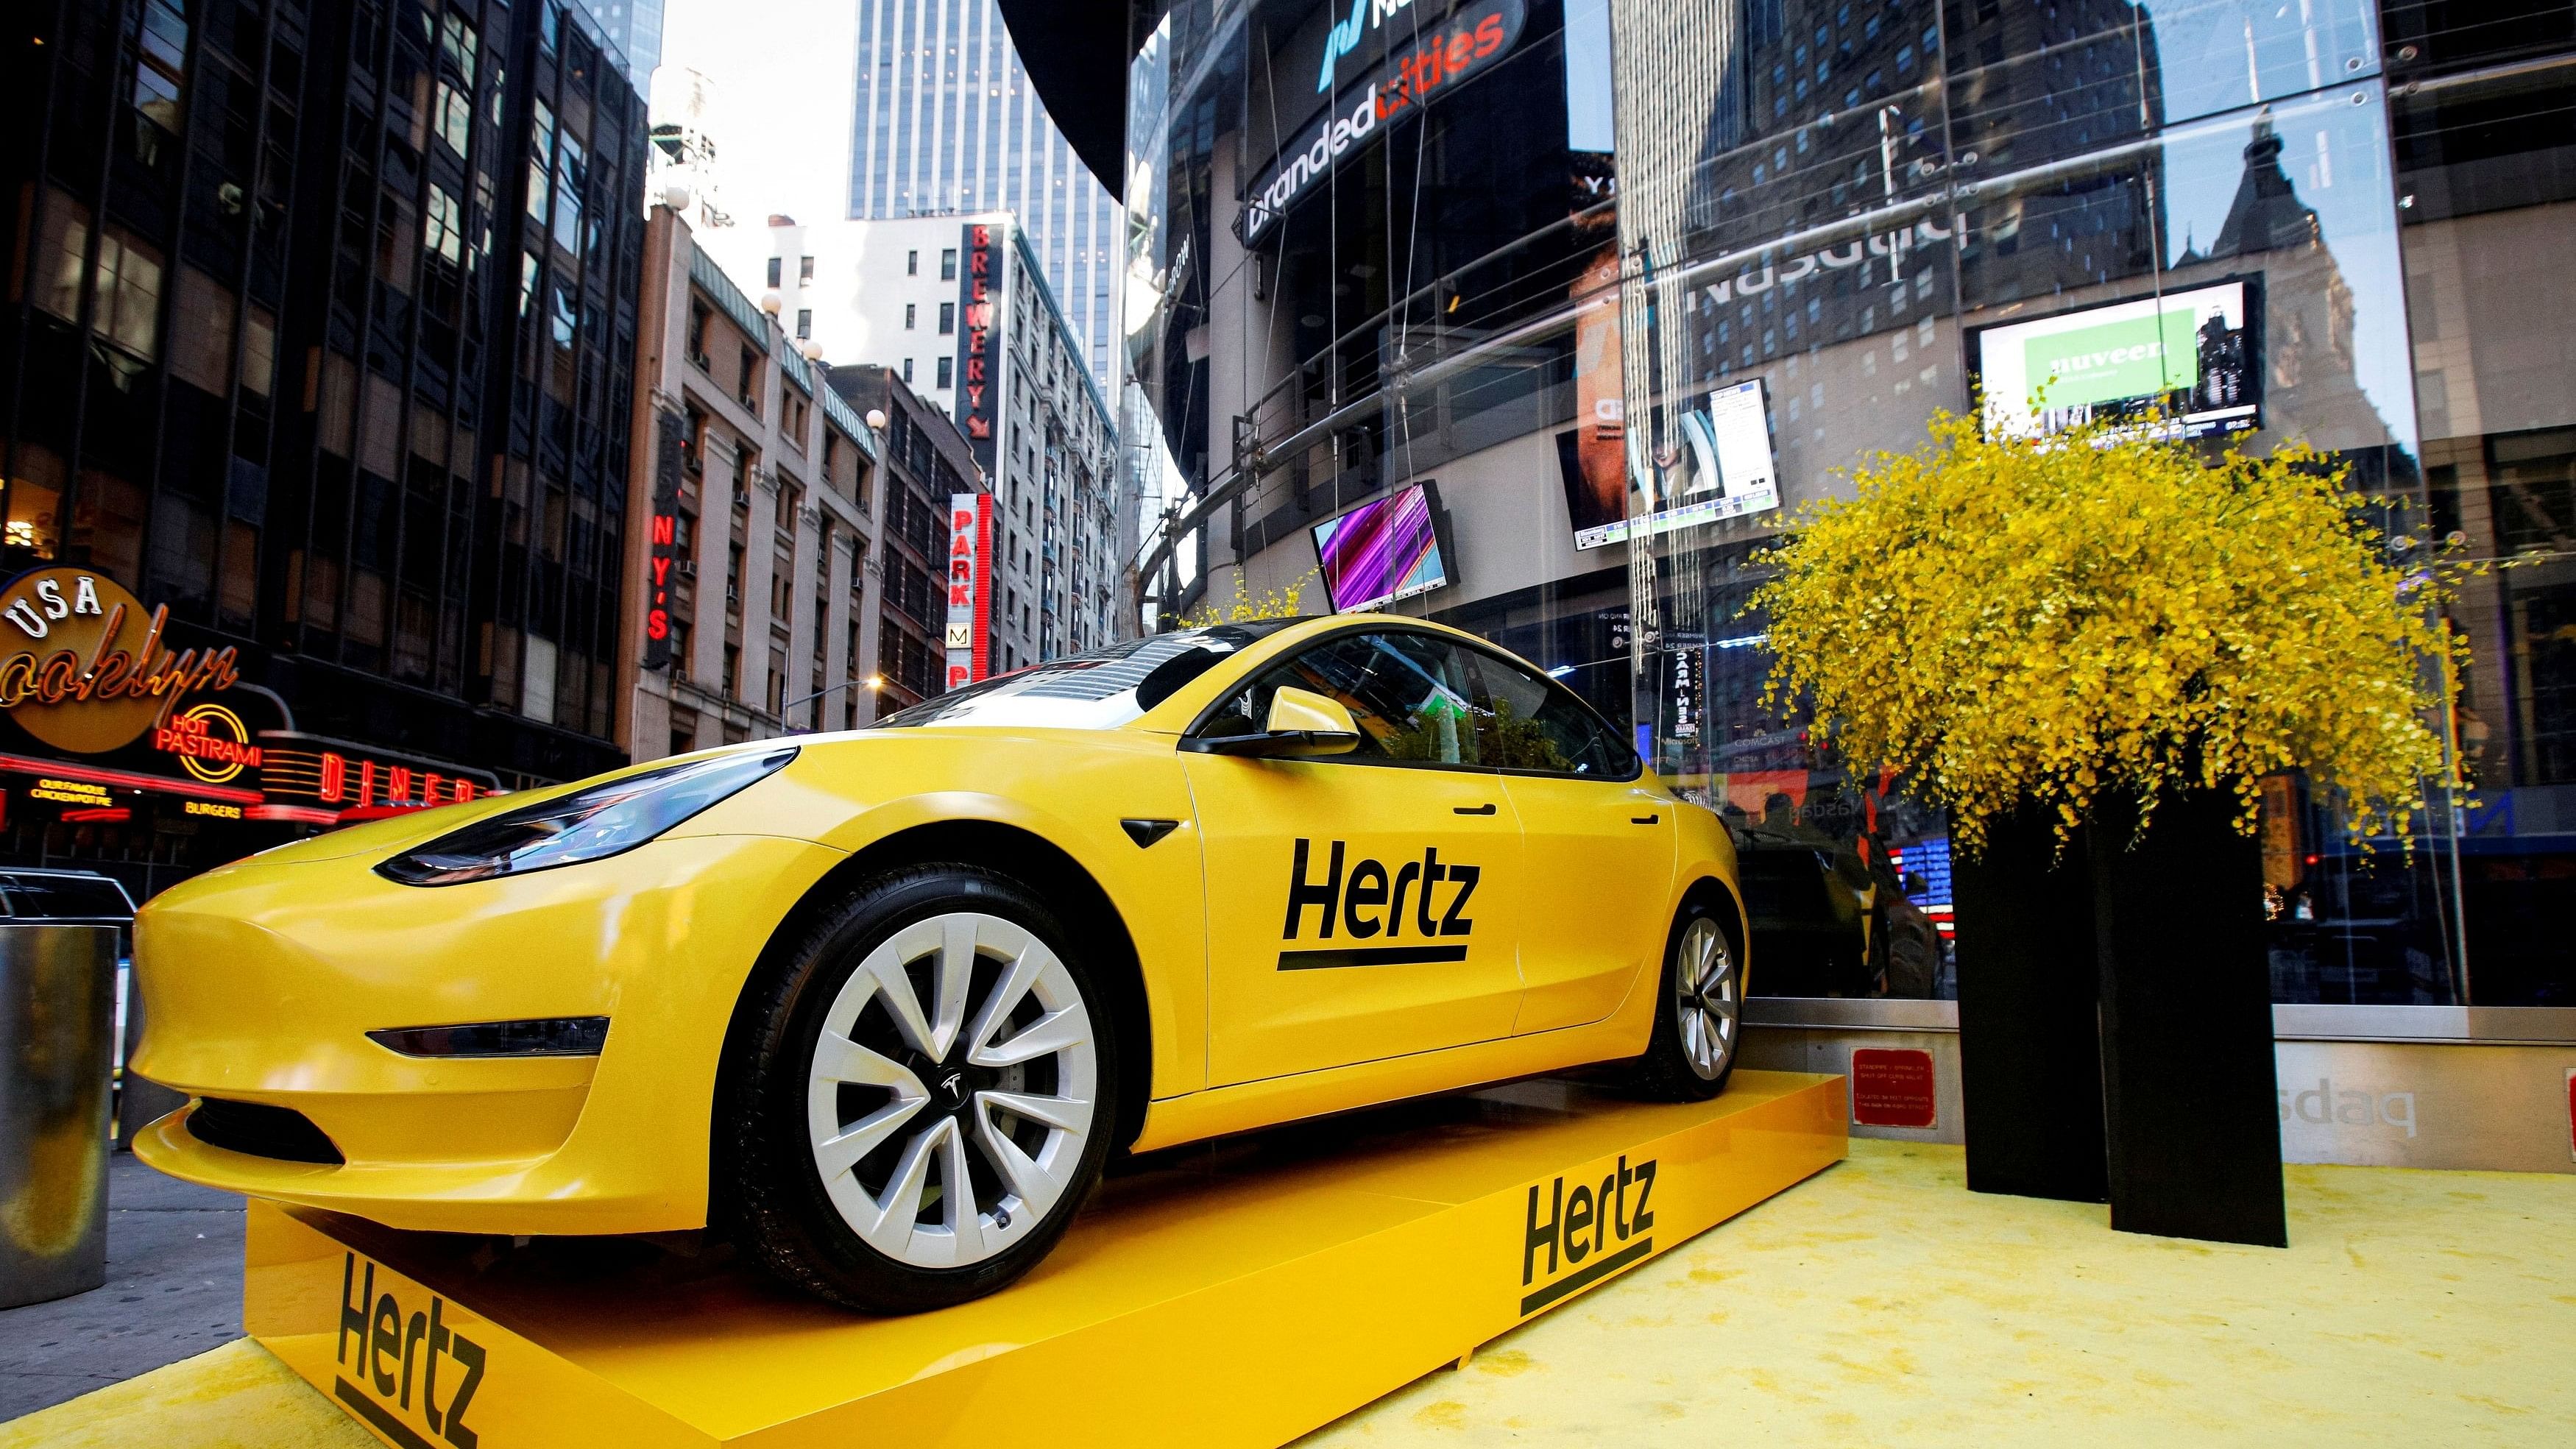 <div class="paragraphs"><p>A Hertz Tesla electric vehicle is displayed during the Hertz Corporation IPO at the Nasdaq Market site in Times Square in New York City, US.</p></div>